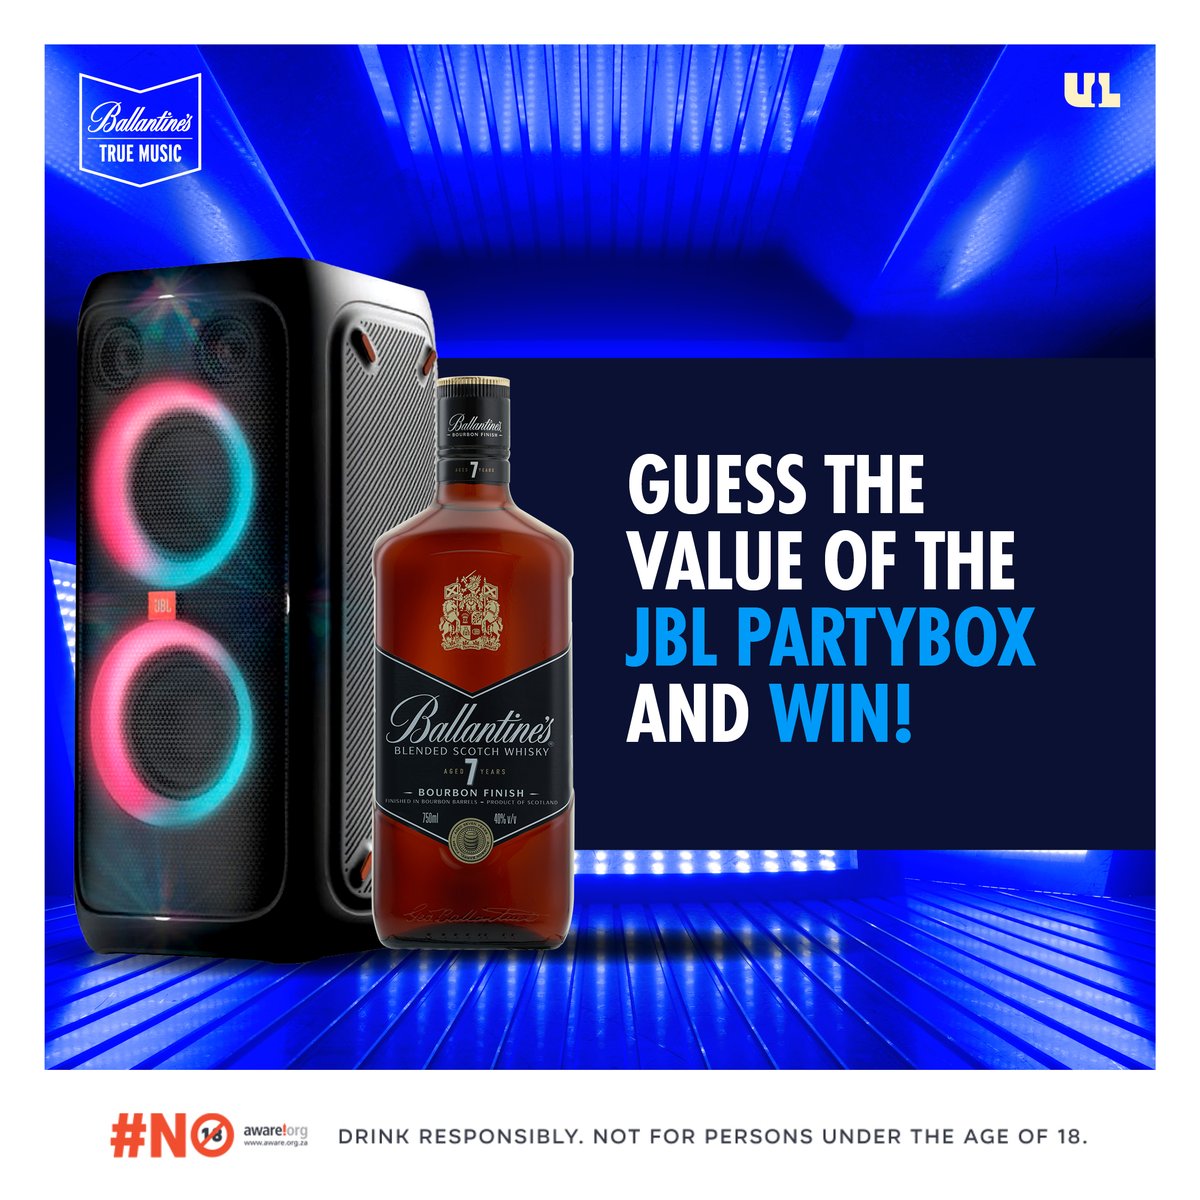 'Party time with Ballantine's' is all about the finest taste in whisky and music. This week, we're asking you to guess the value of the JBL PartyBox and you could #win a bottle of Ballantine's 7YO! #Truemusic #Ballantines #TheresNoWrongWay